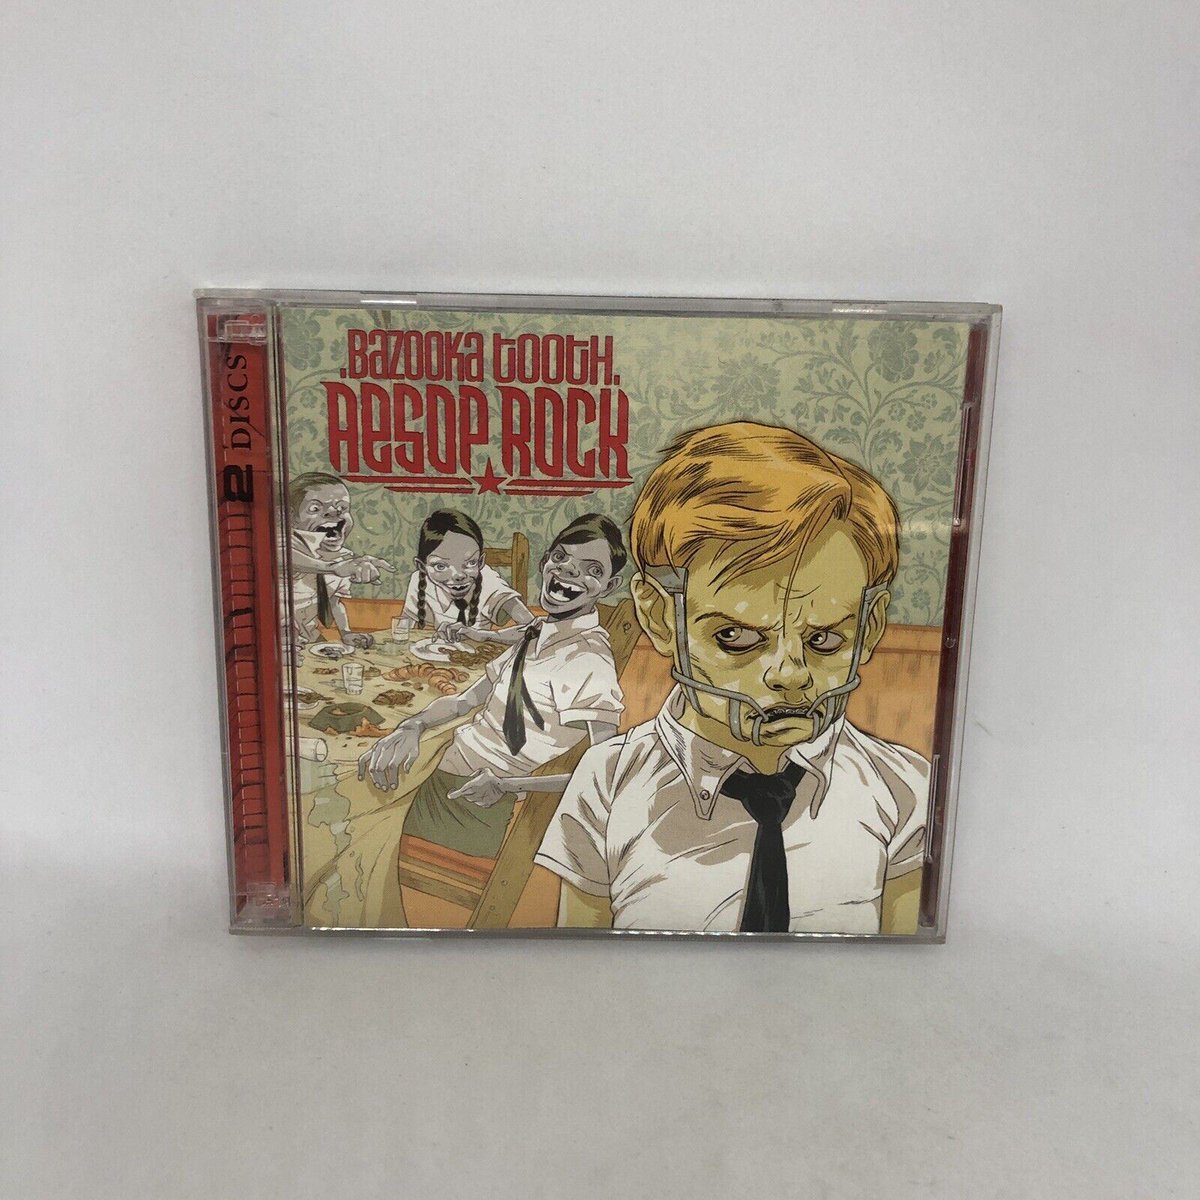 Happy 20th Anniversary #AesopRock Bazooka Tooth #ClassicHipHop